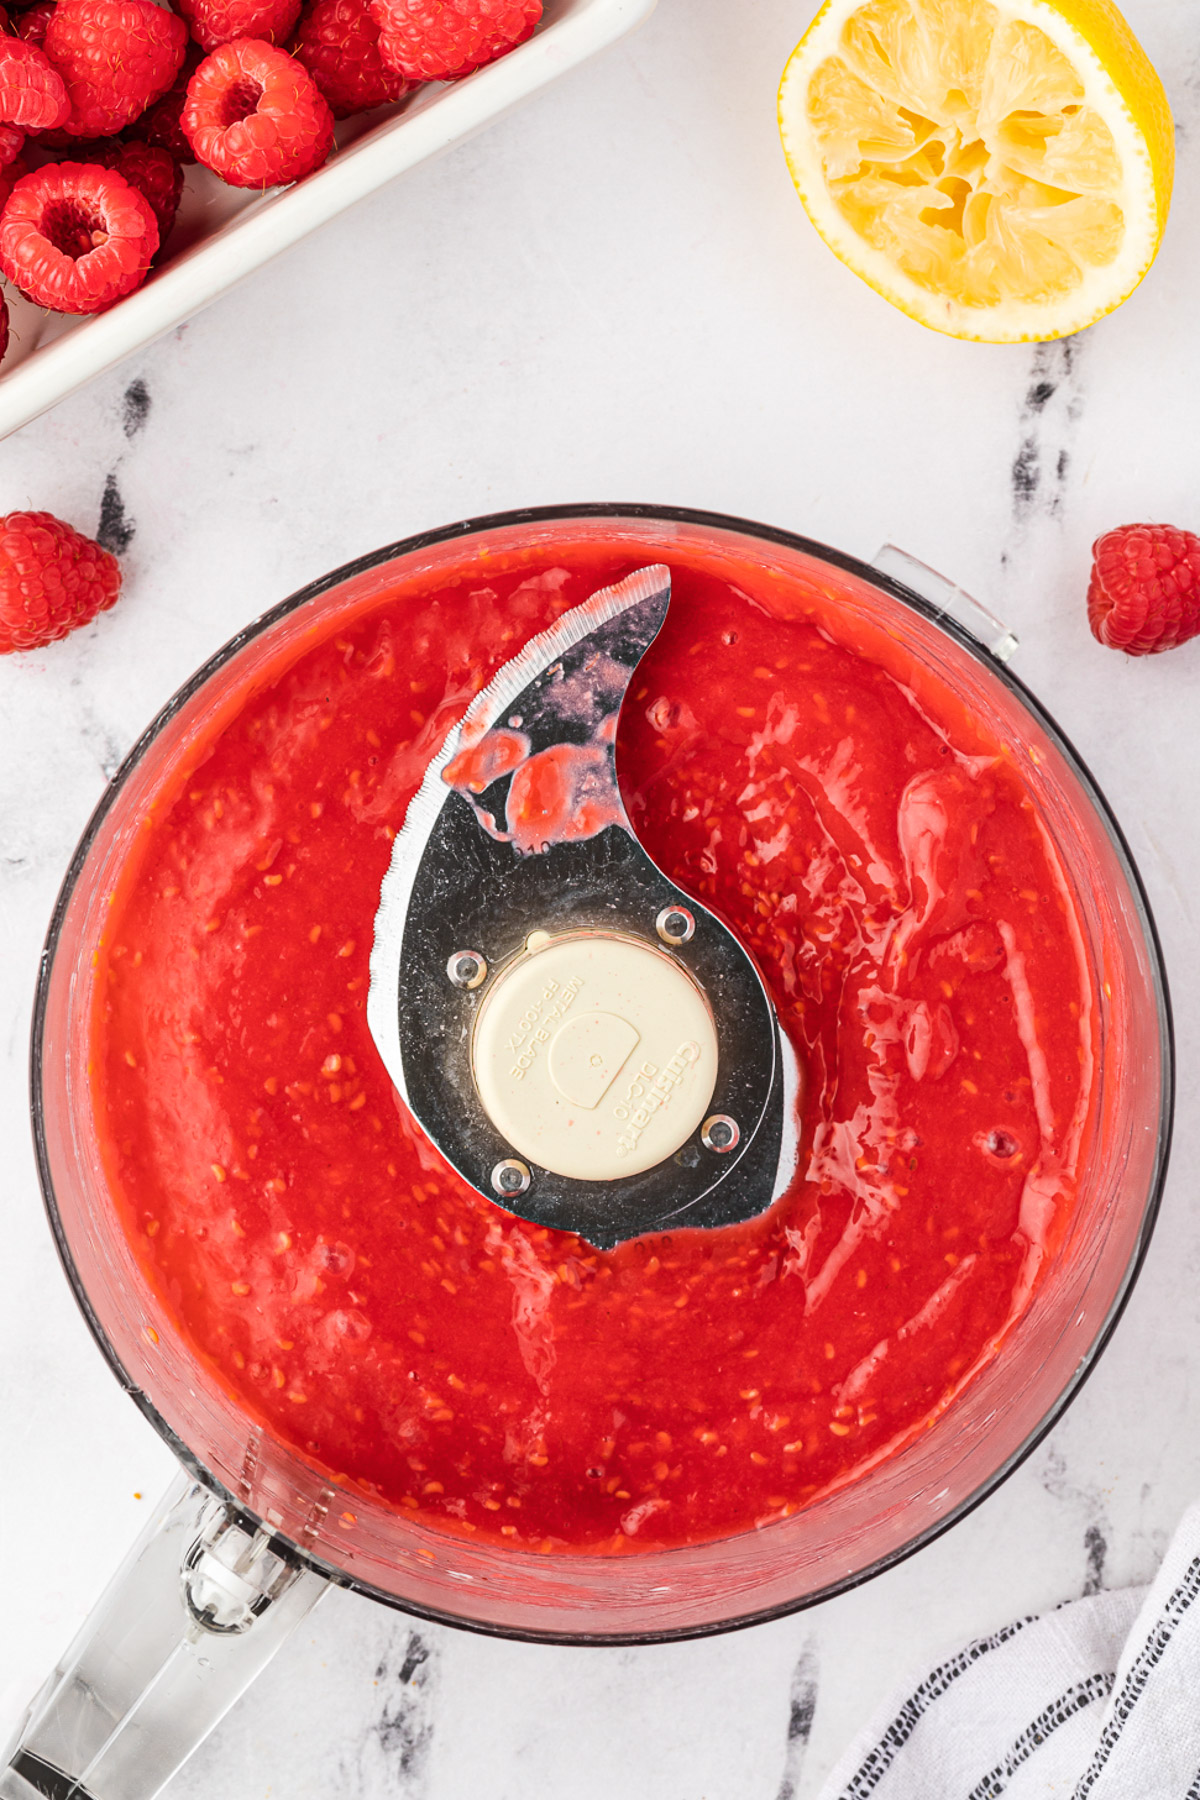 Overhead view of raspberry puree in a food processor bowl on a marble background with more raspberries and a tea towel next to it.